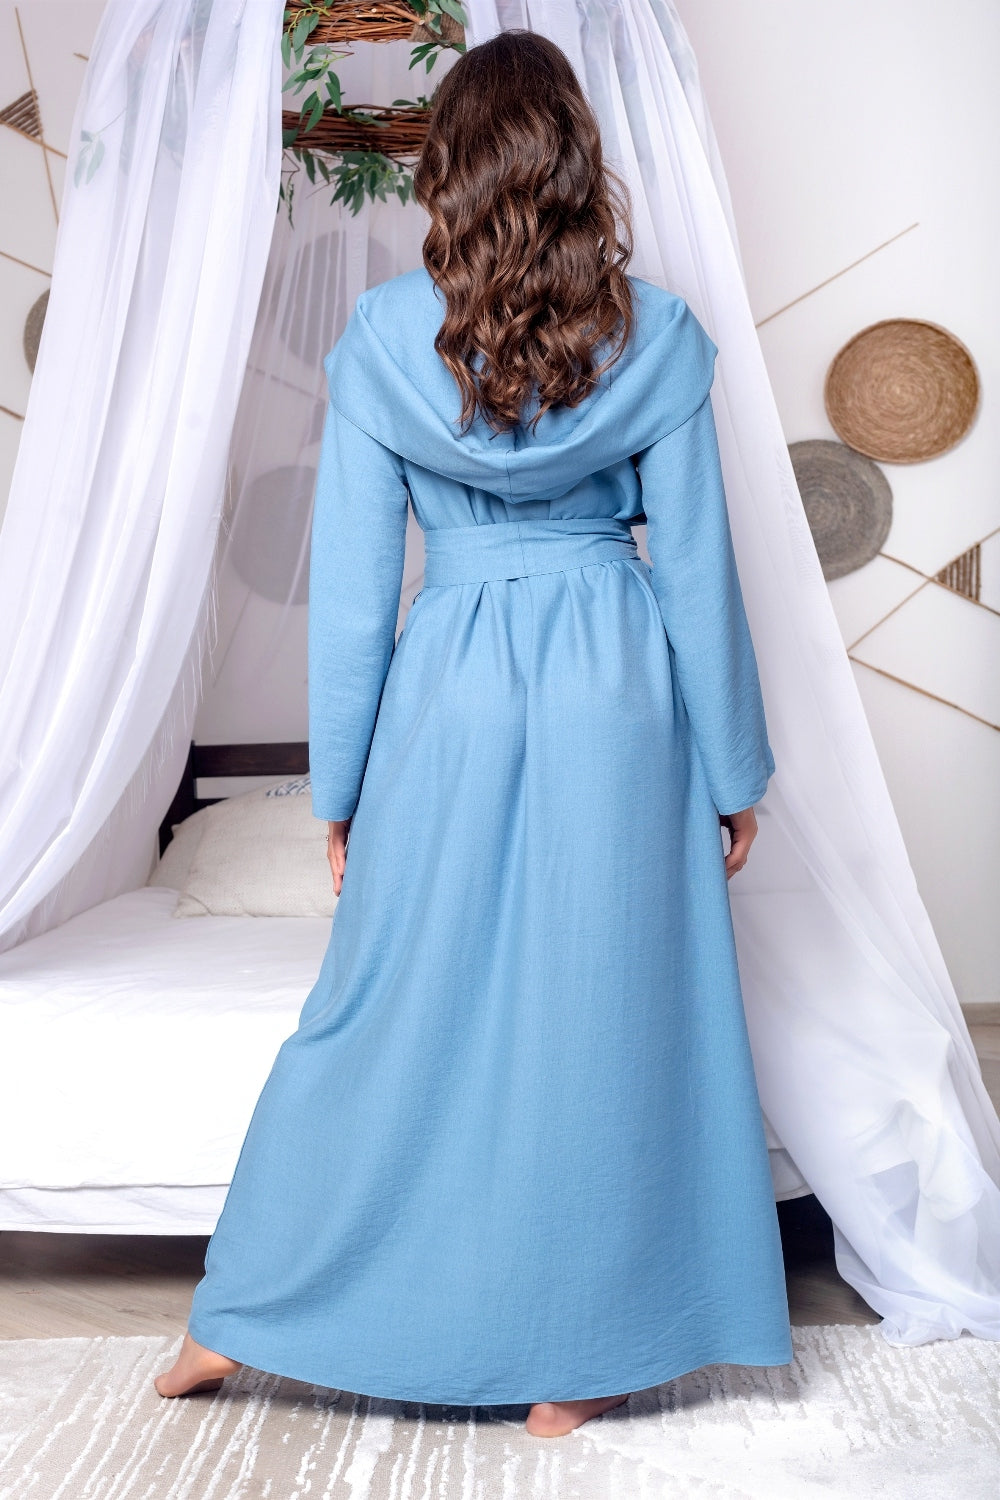 Exquisite Floor Length Linen Robe with Hood in Blue - Perfect for Gifts and Romantic Evenings